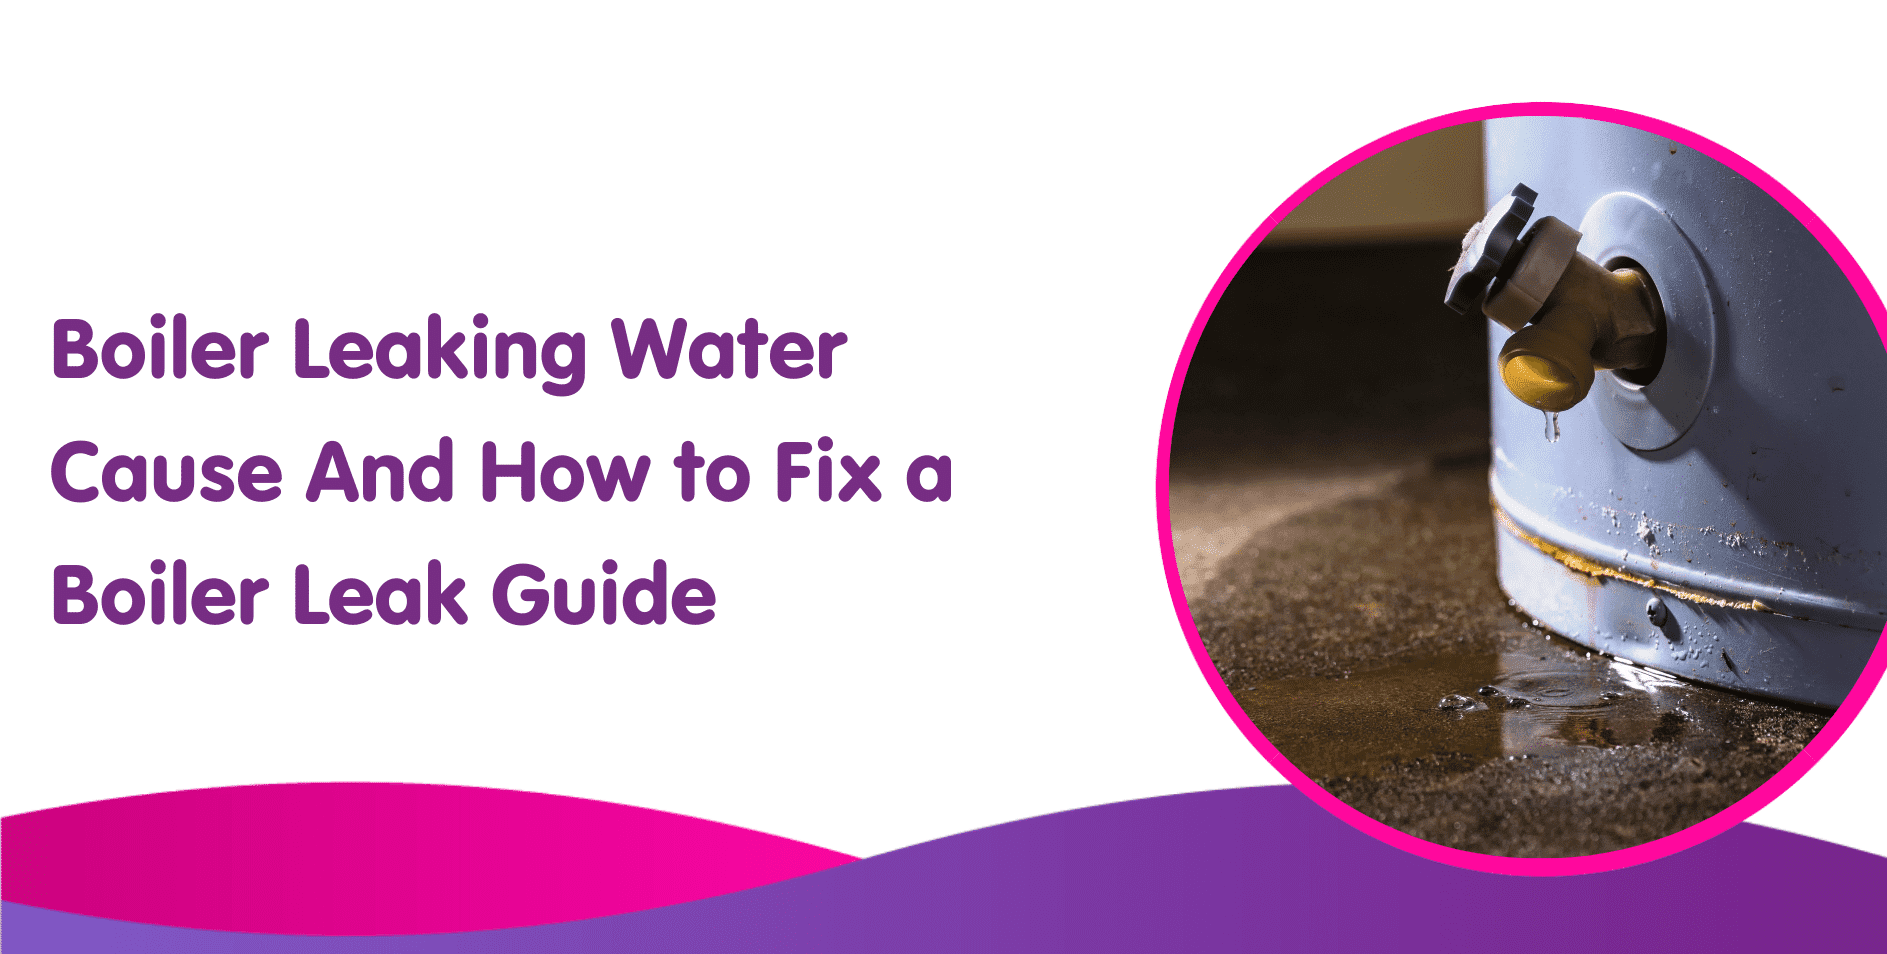 https://www.boilercentral.com/wp-content/uploads/Boiler-Leaking-Water-Cause-And-How-to-Fix-a-Boiler-Leak-Guide.png